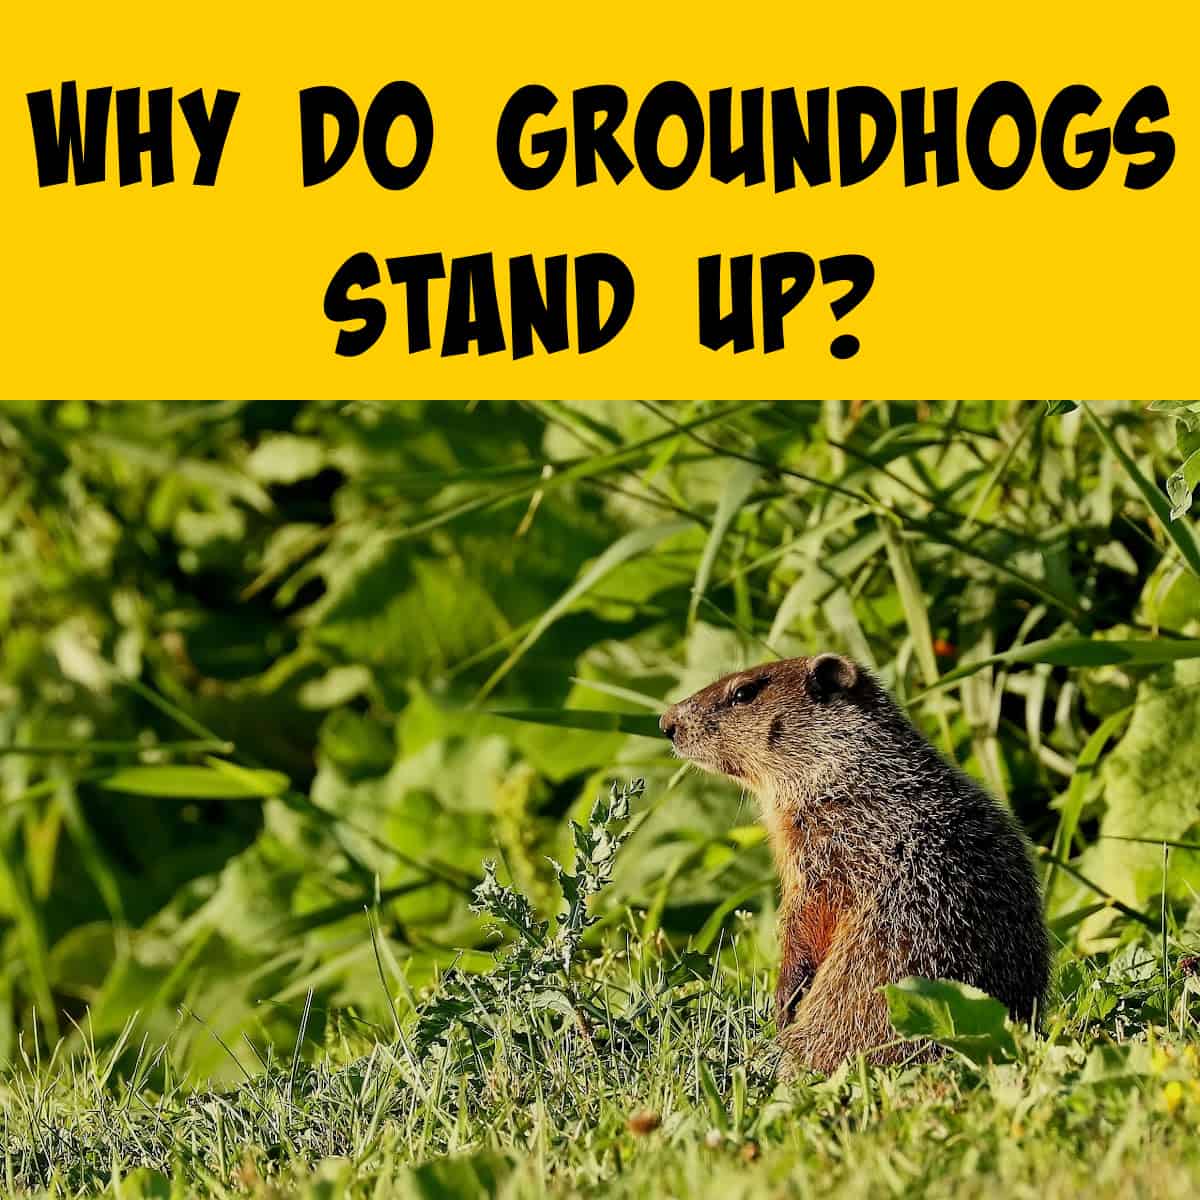 Groundhog standing up in a field